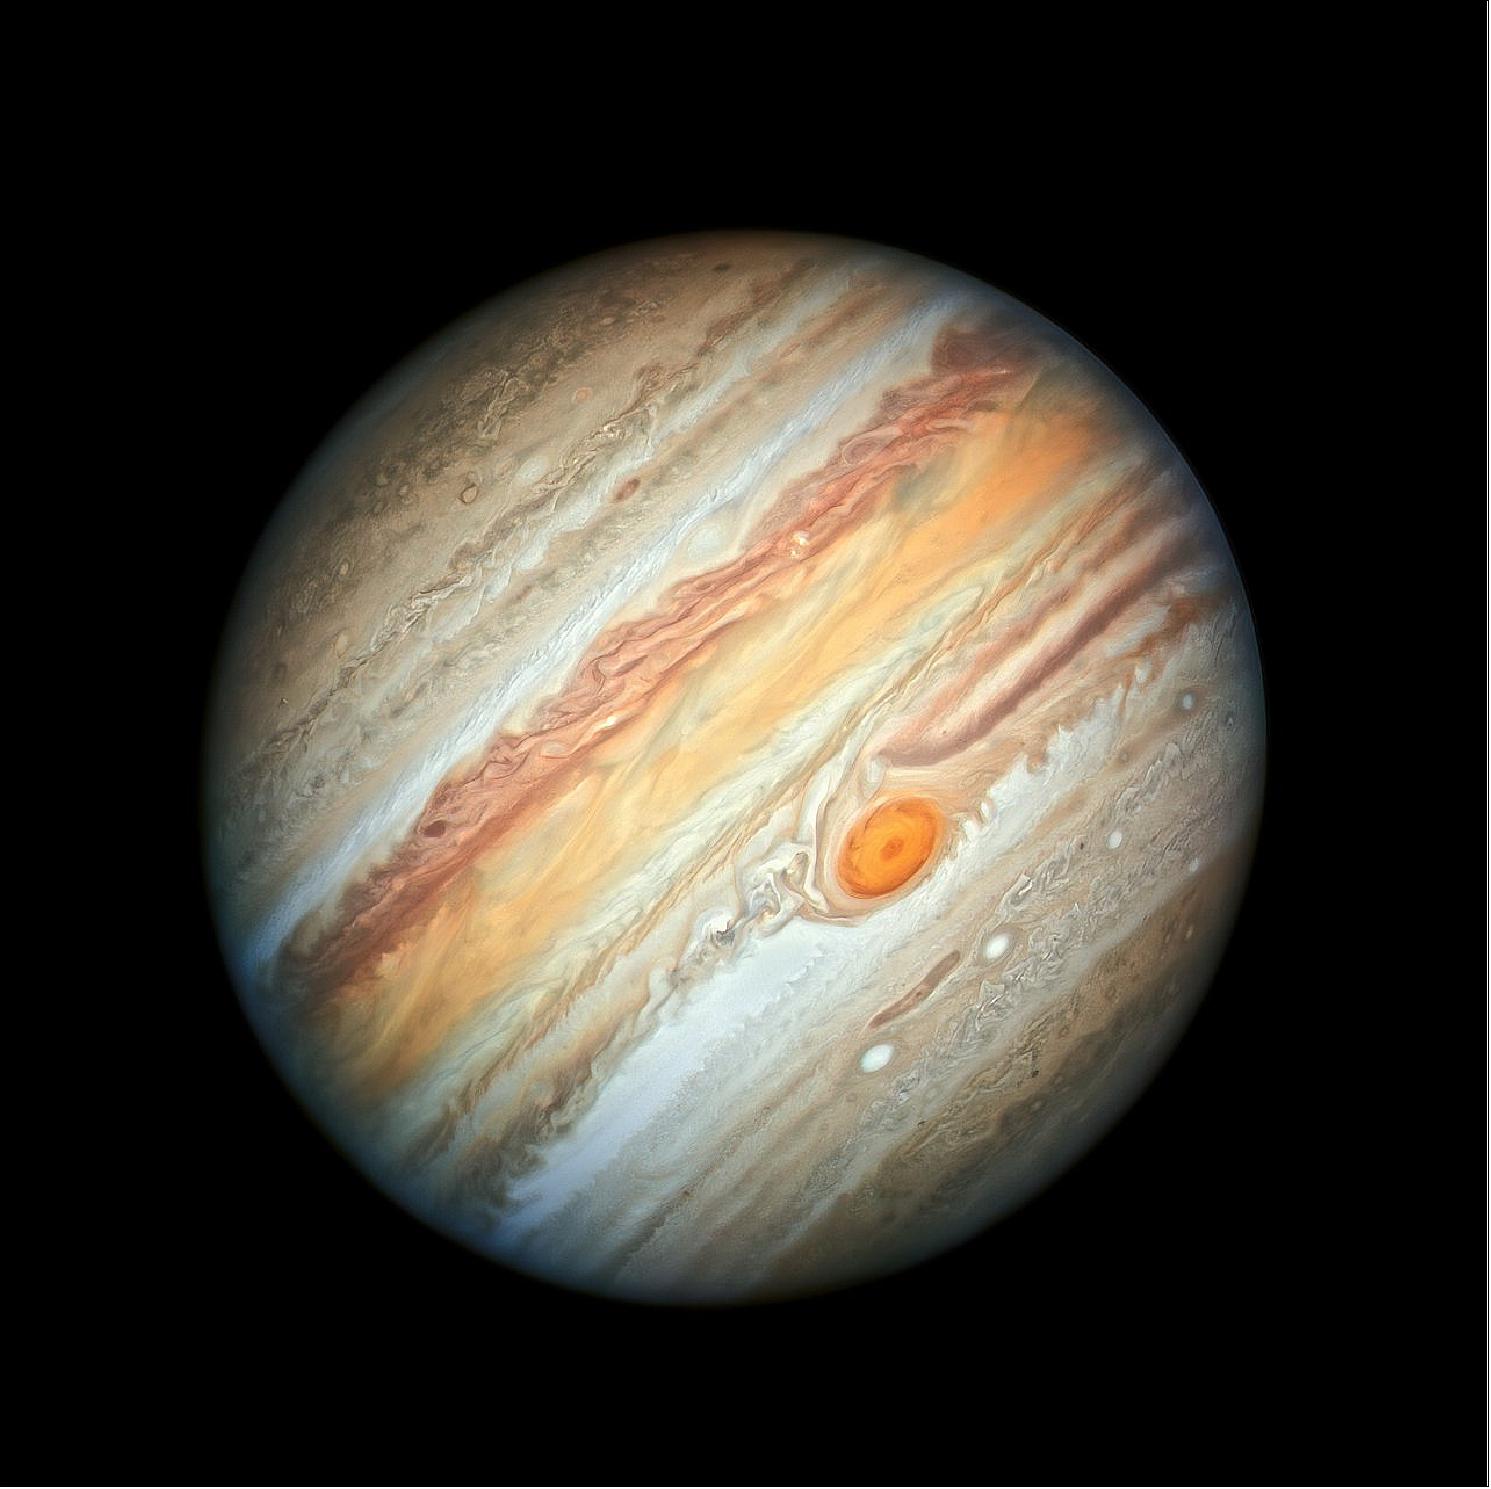 Figure 32: The NASA/ESA Hubble Space Telescope reveals the intricate, detailed beauty of Jupiter’s clouds in this new image taken on 27 June 2019 by Hubble’s Wide Field Camera 3, when the planet was 644 million kilometers from Earth — its closest distance this year. The image features the planet’s trademark Great Red Spot and a more intense color palette in the clouds swirling in the planet’s turbulent atmosphere than seen in previous years [image credit: NASA, ESA, A. Simon (Goddard Space Flight Center), and M.H. Wong (University of California, Berkeley)]